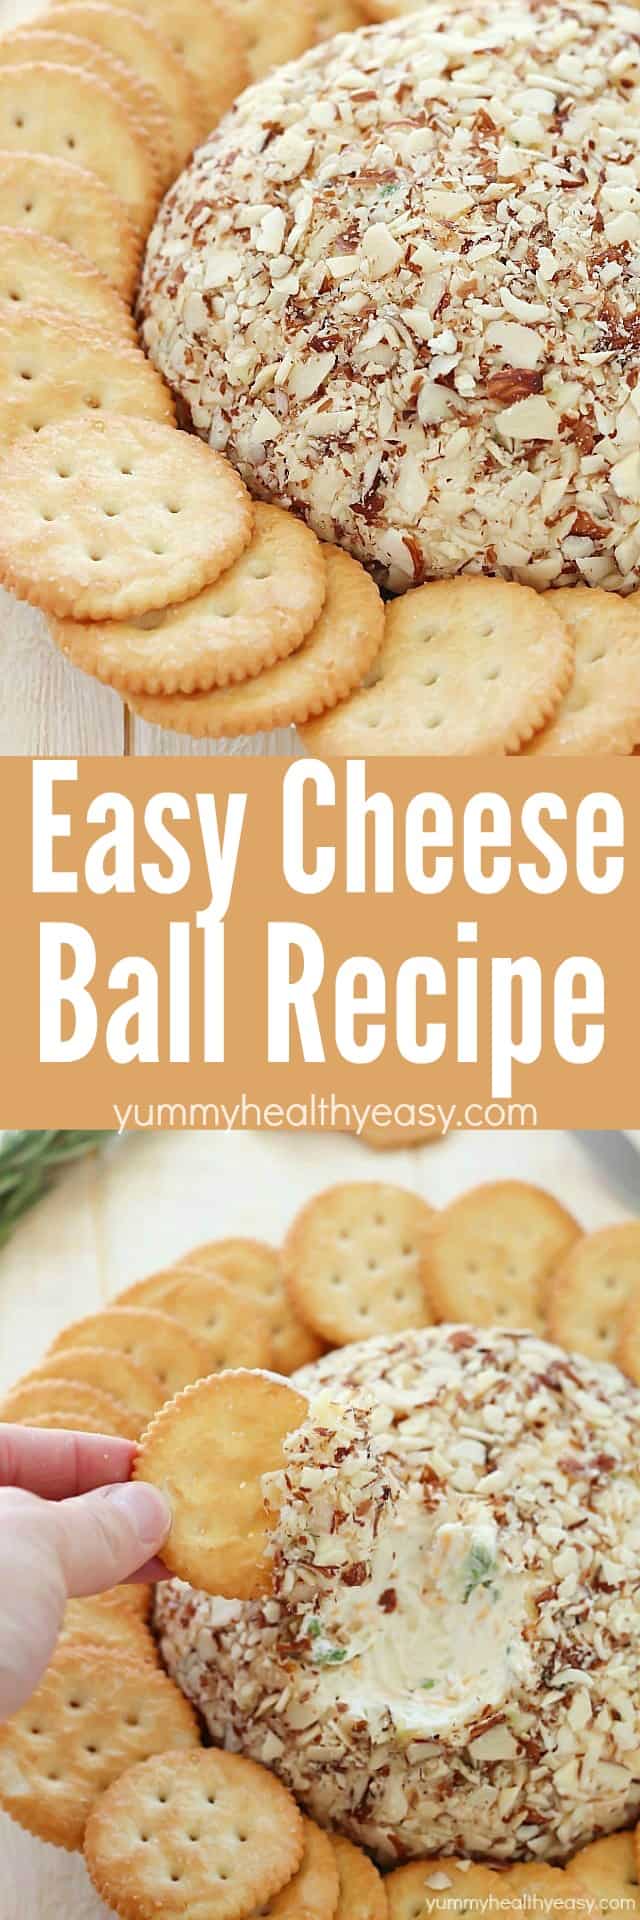 Get ready to be the star of the party when you show up with this super easy cheese ball! It's sure to impress any guests! It's creamy, tangy, irresistible and won't take more than a few minutes to whip up.